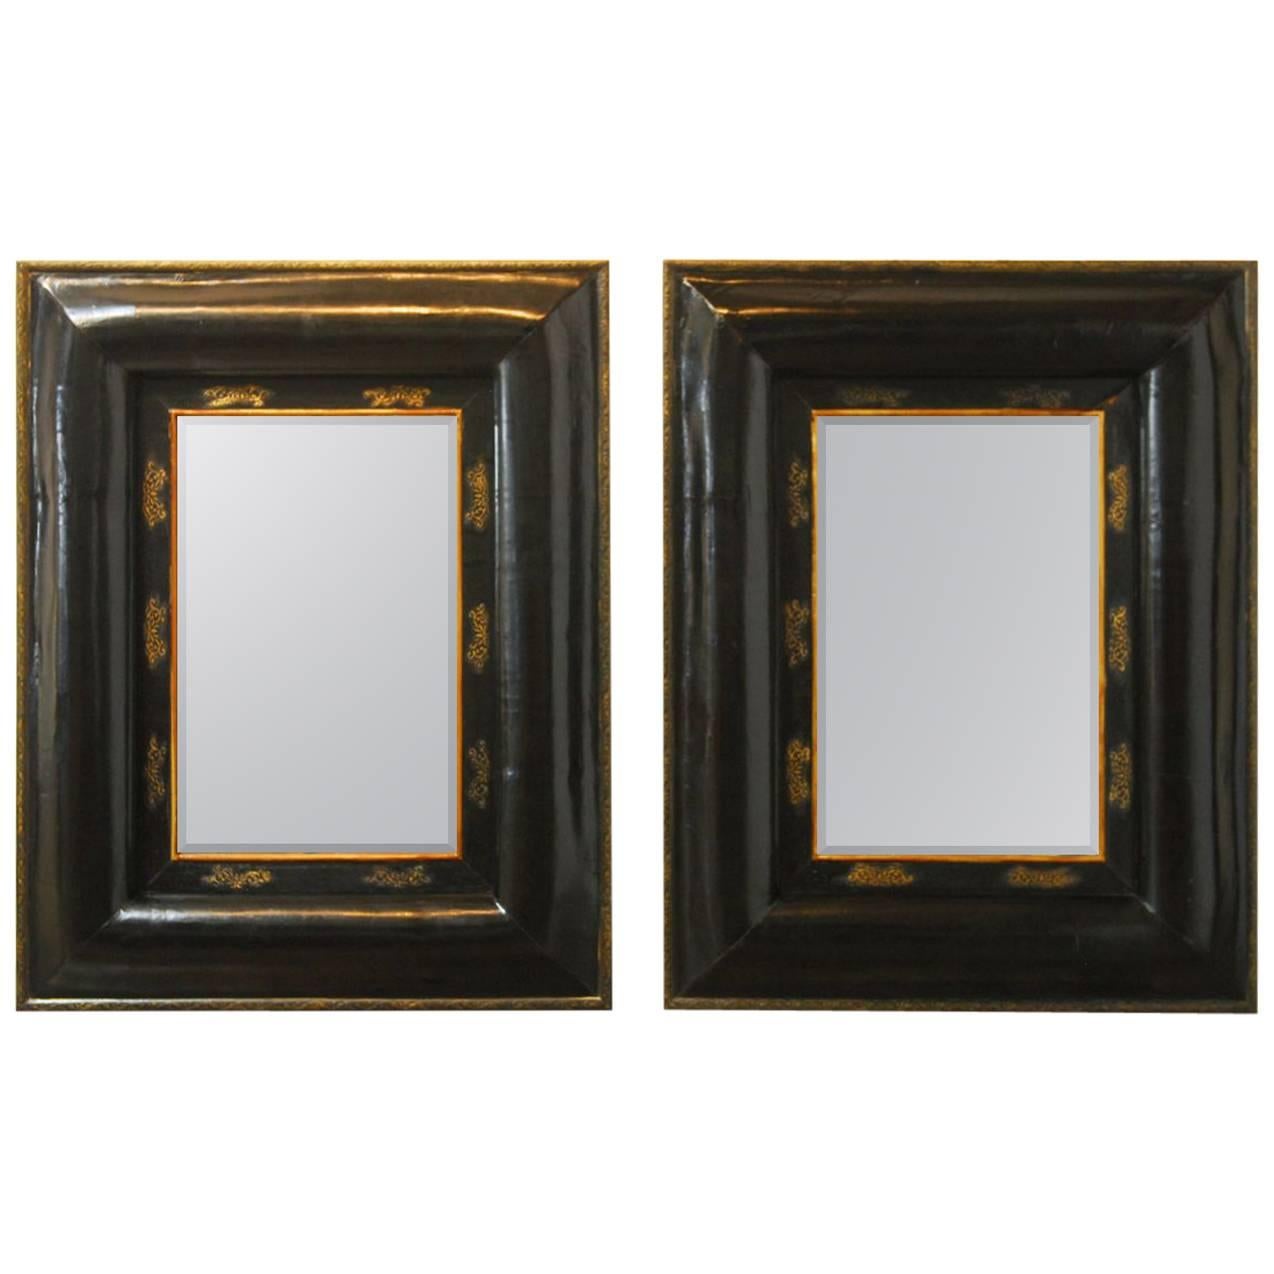 Monumental Pair of Portuguese Style Mirrors